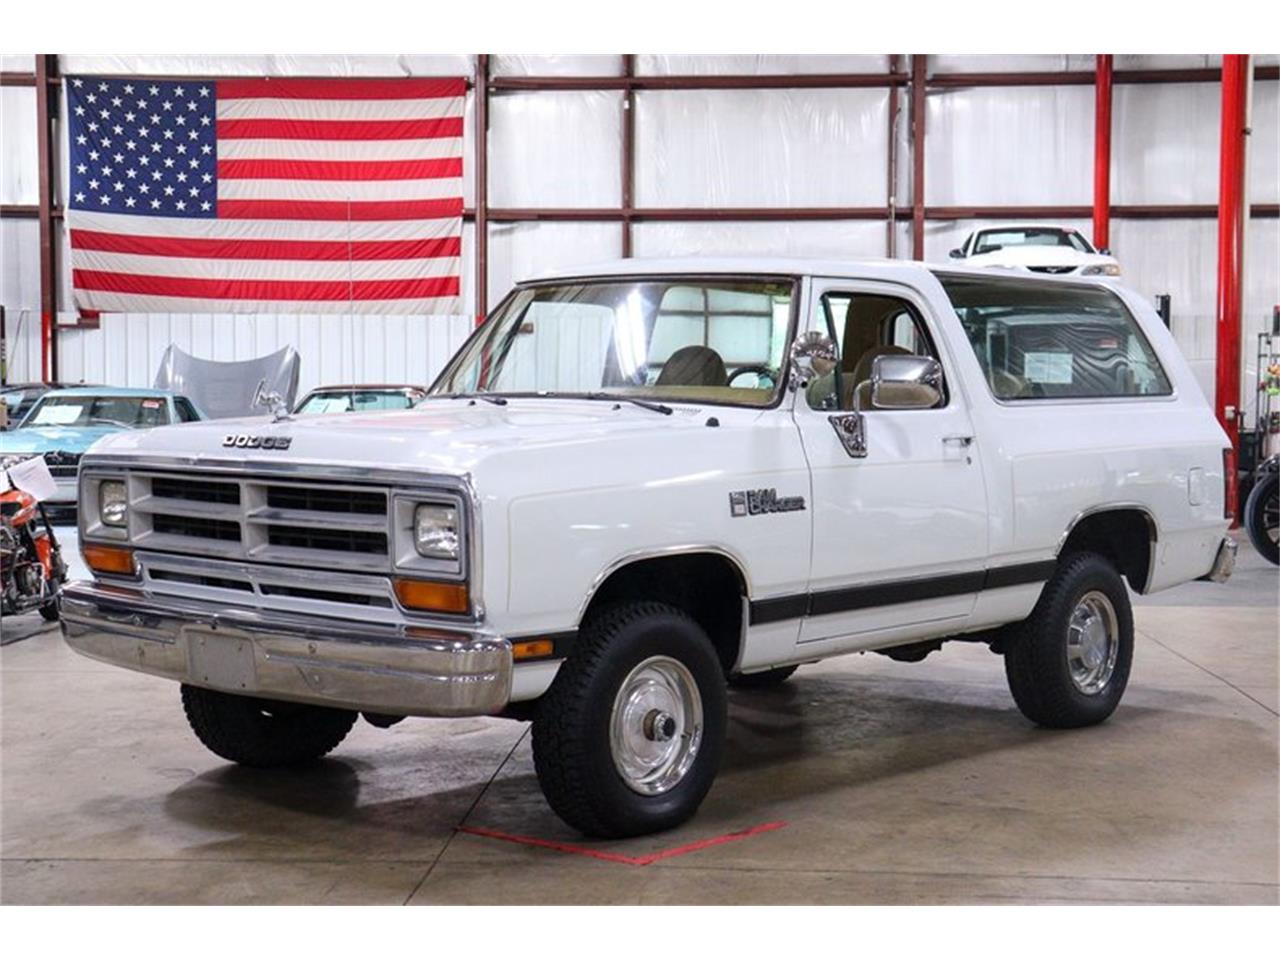 For Sale: 1988 Dodge Ramcharger in Ken2od, Michigan for sale in Grand Rapids, MI